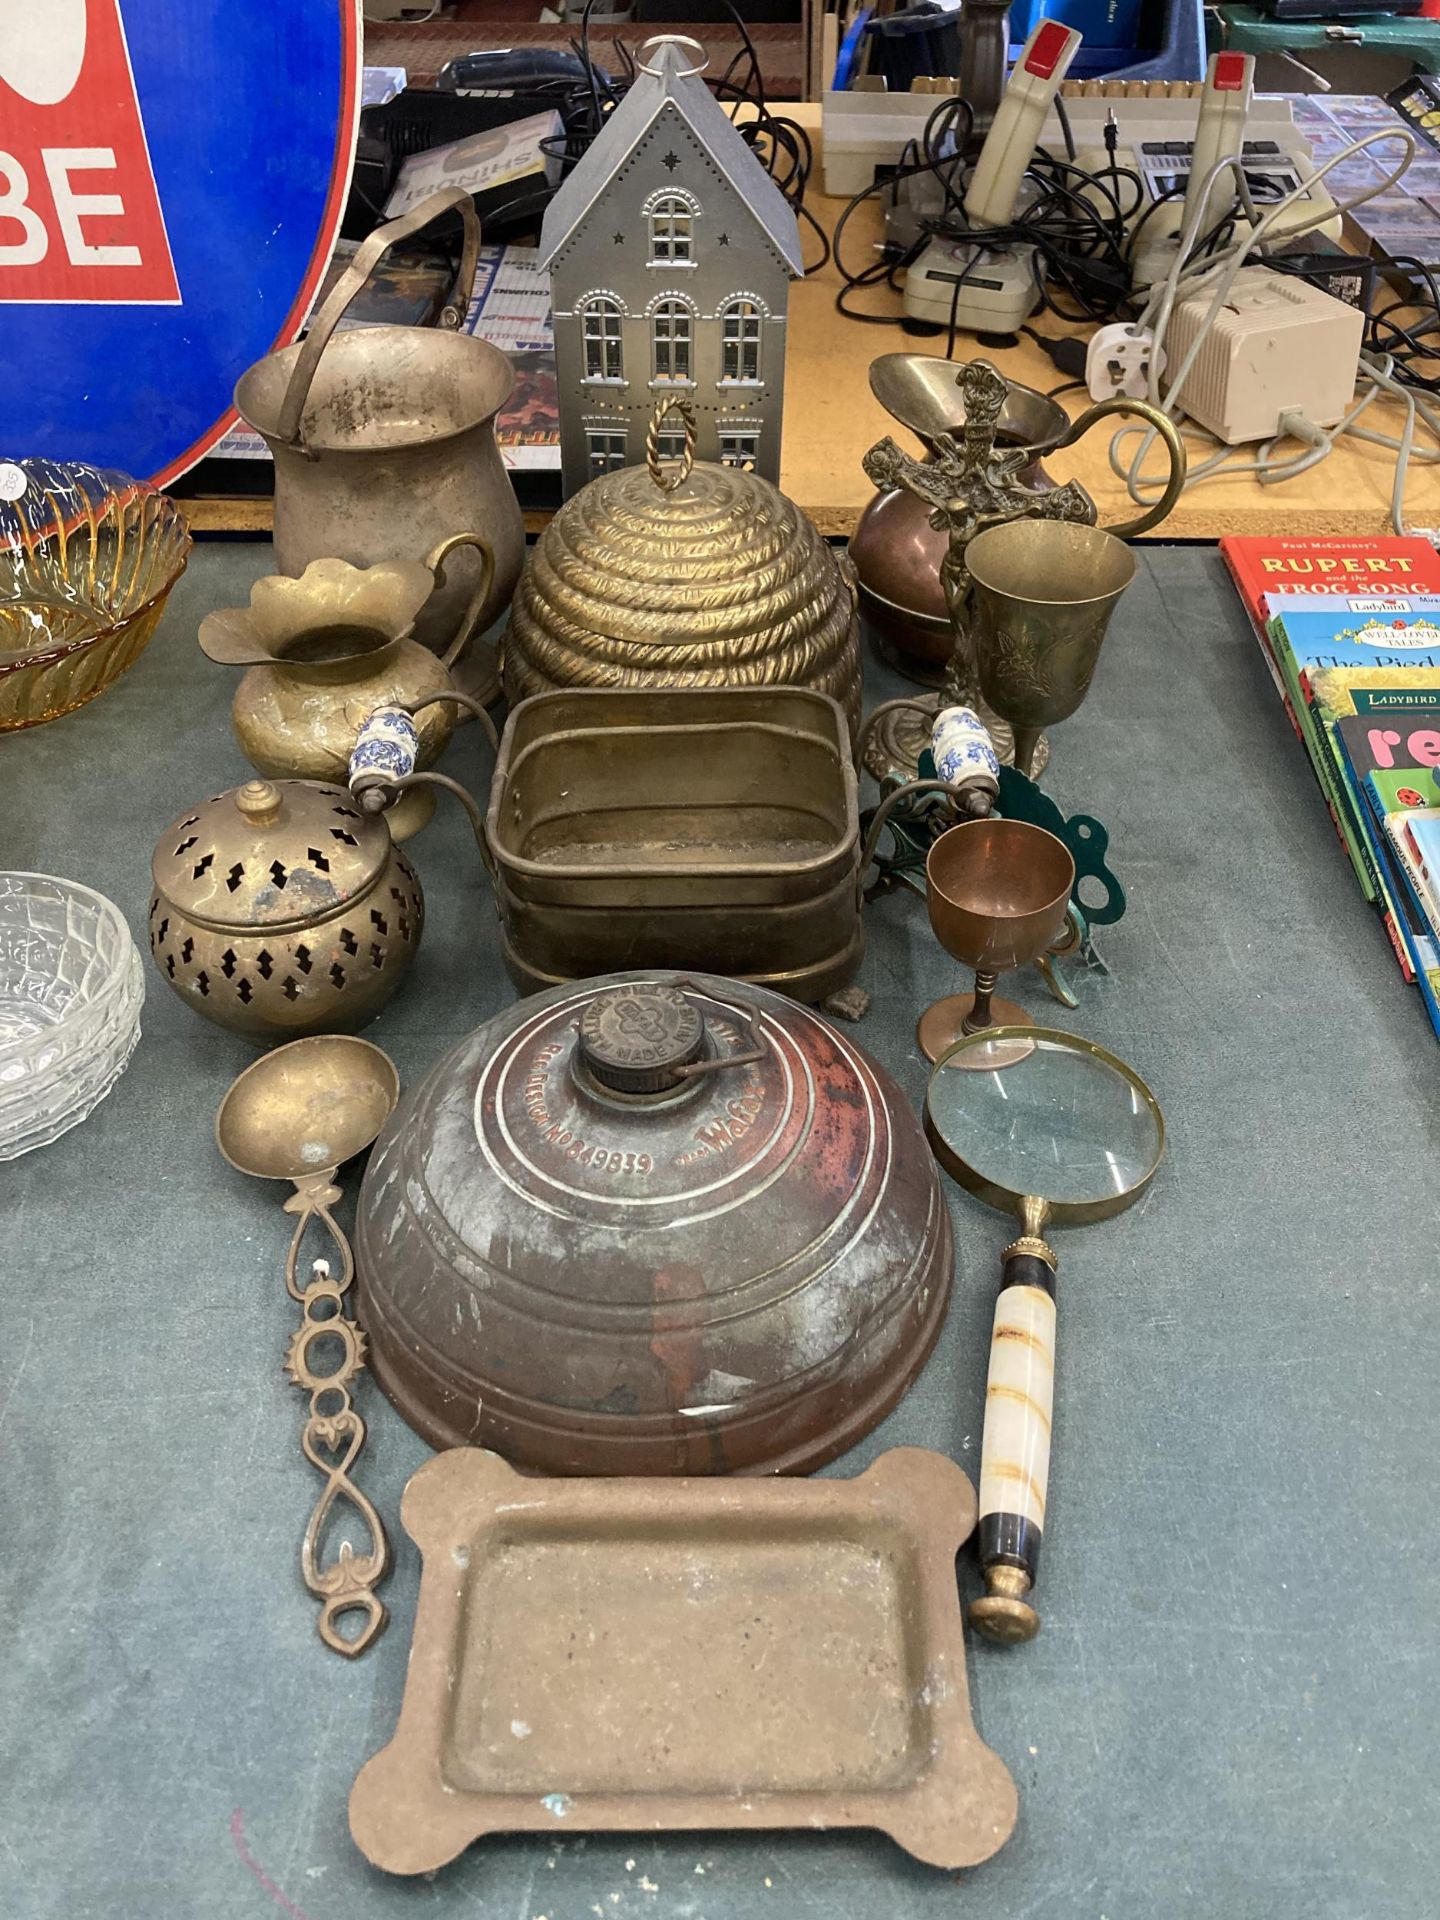 A MIXED LOT OF VINTAGE BRASS AND FURTHER ITEMS, WARMER, JUG, HOUSE MODEL ETC